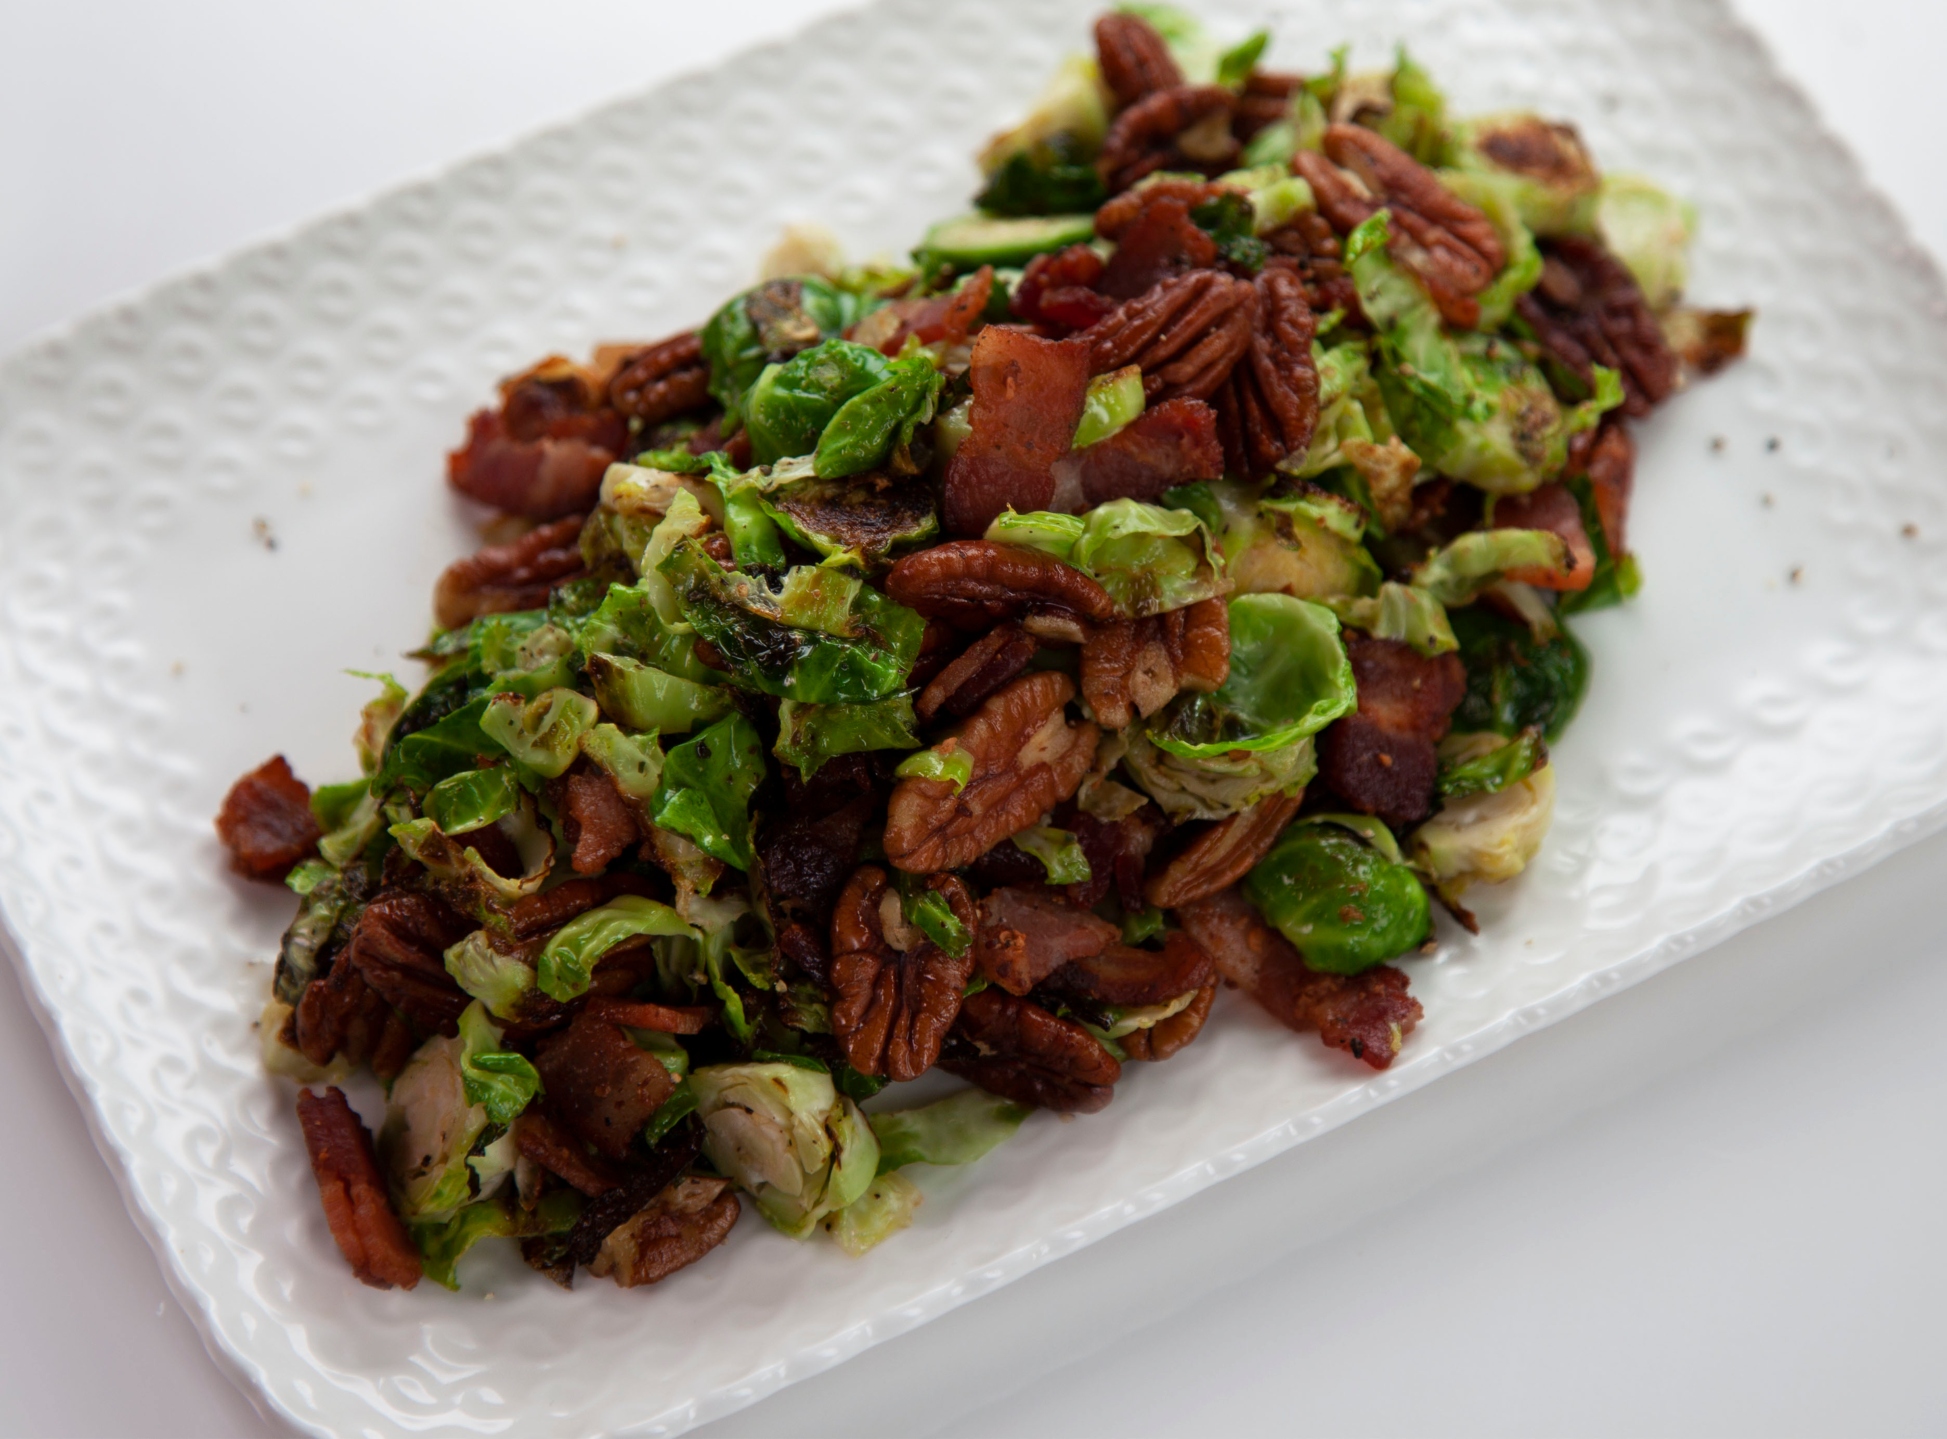 Warm Brussels sprouts and bacon